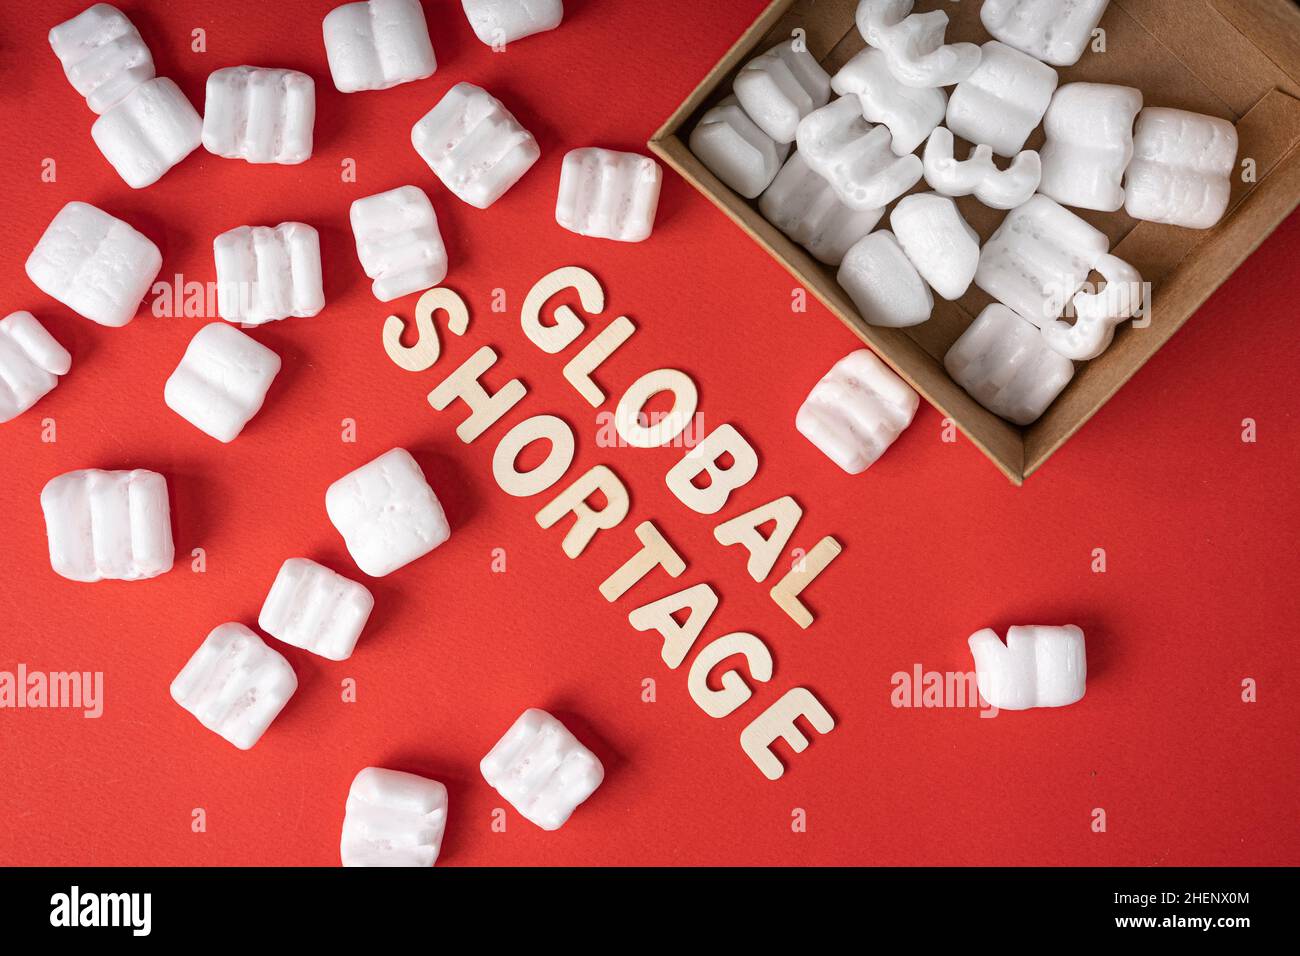 Business concept. Layout of packing peanuts, box and wood alphabet with text GLOBAL SHORTAGE. Stock Photo